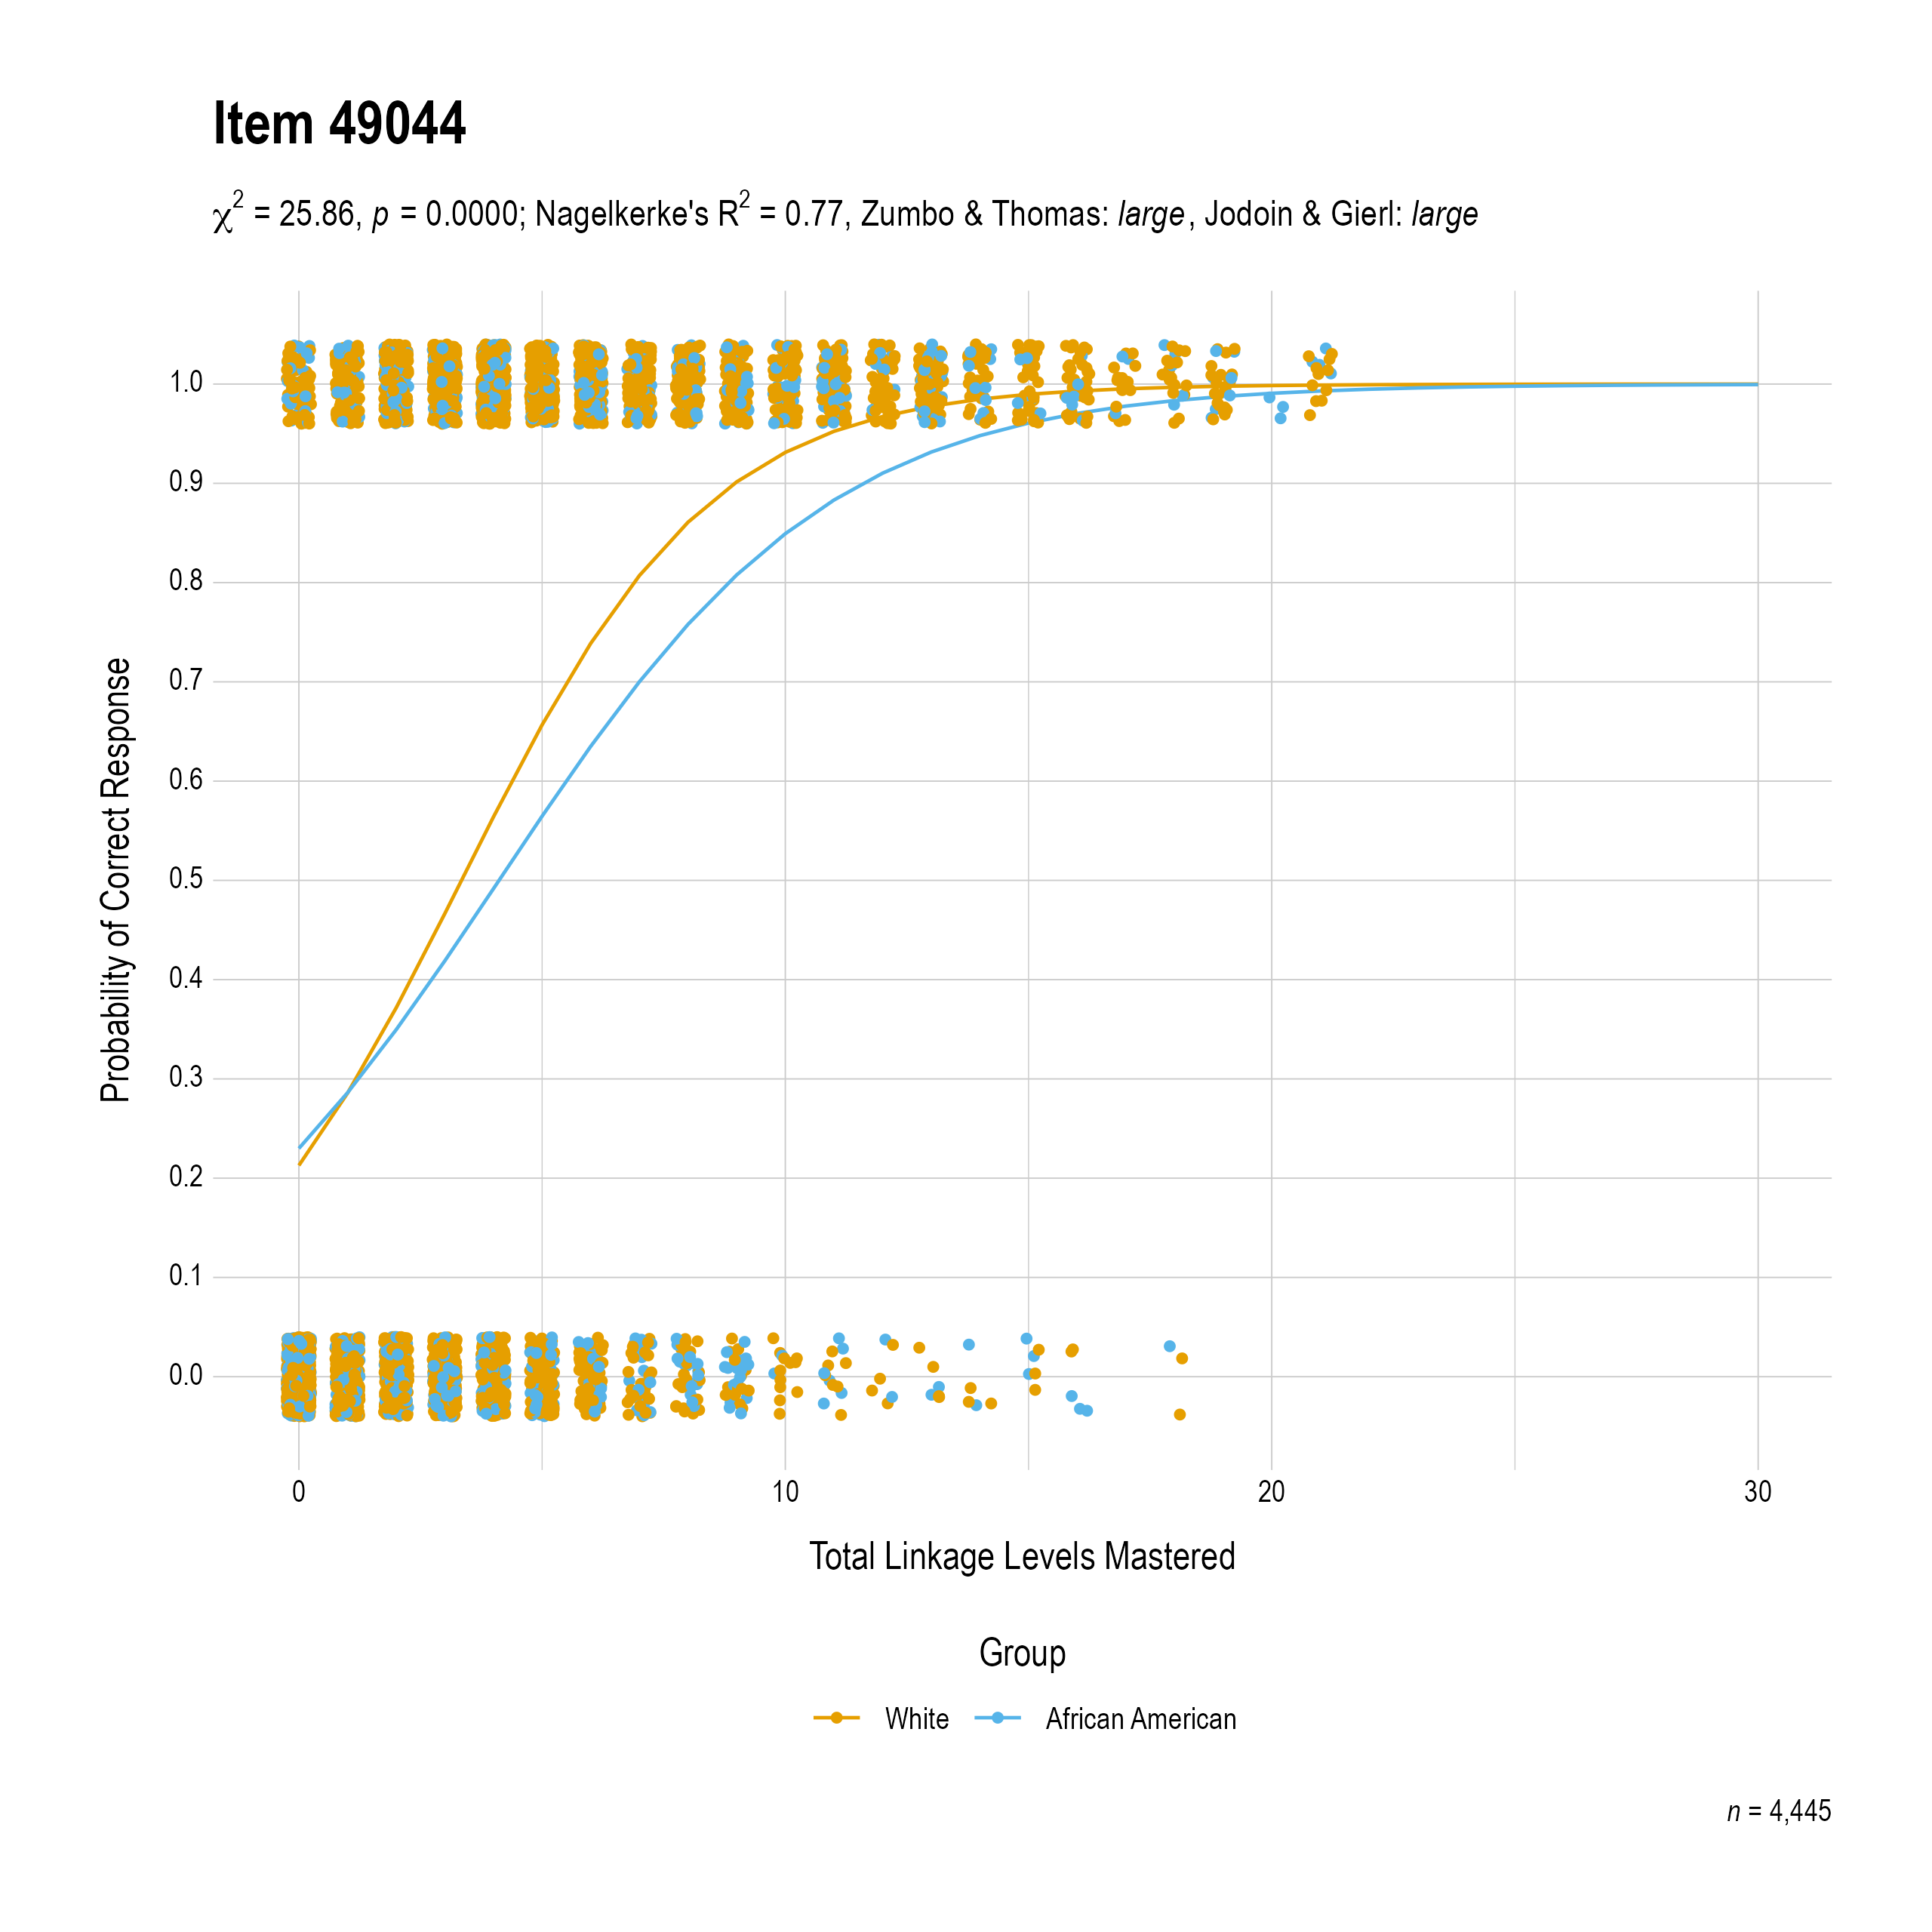 The plot of the combined race differential item function evidence for Science item 49044. The figure contains points shaded by group. The figure also contains a logistic regression curve for each group. The total linkage levels mastered in is on the x-axis, and the probability of a correct response is on the y-axis.